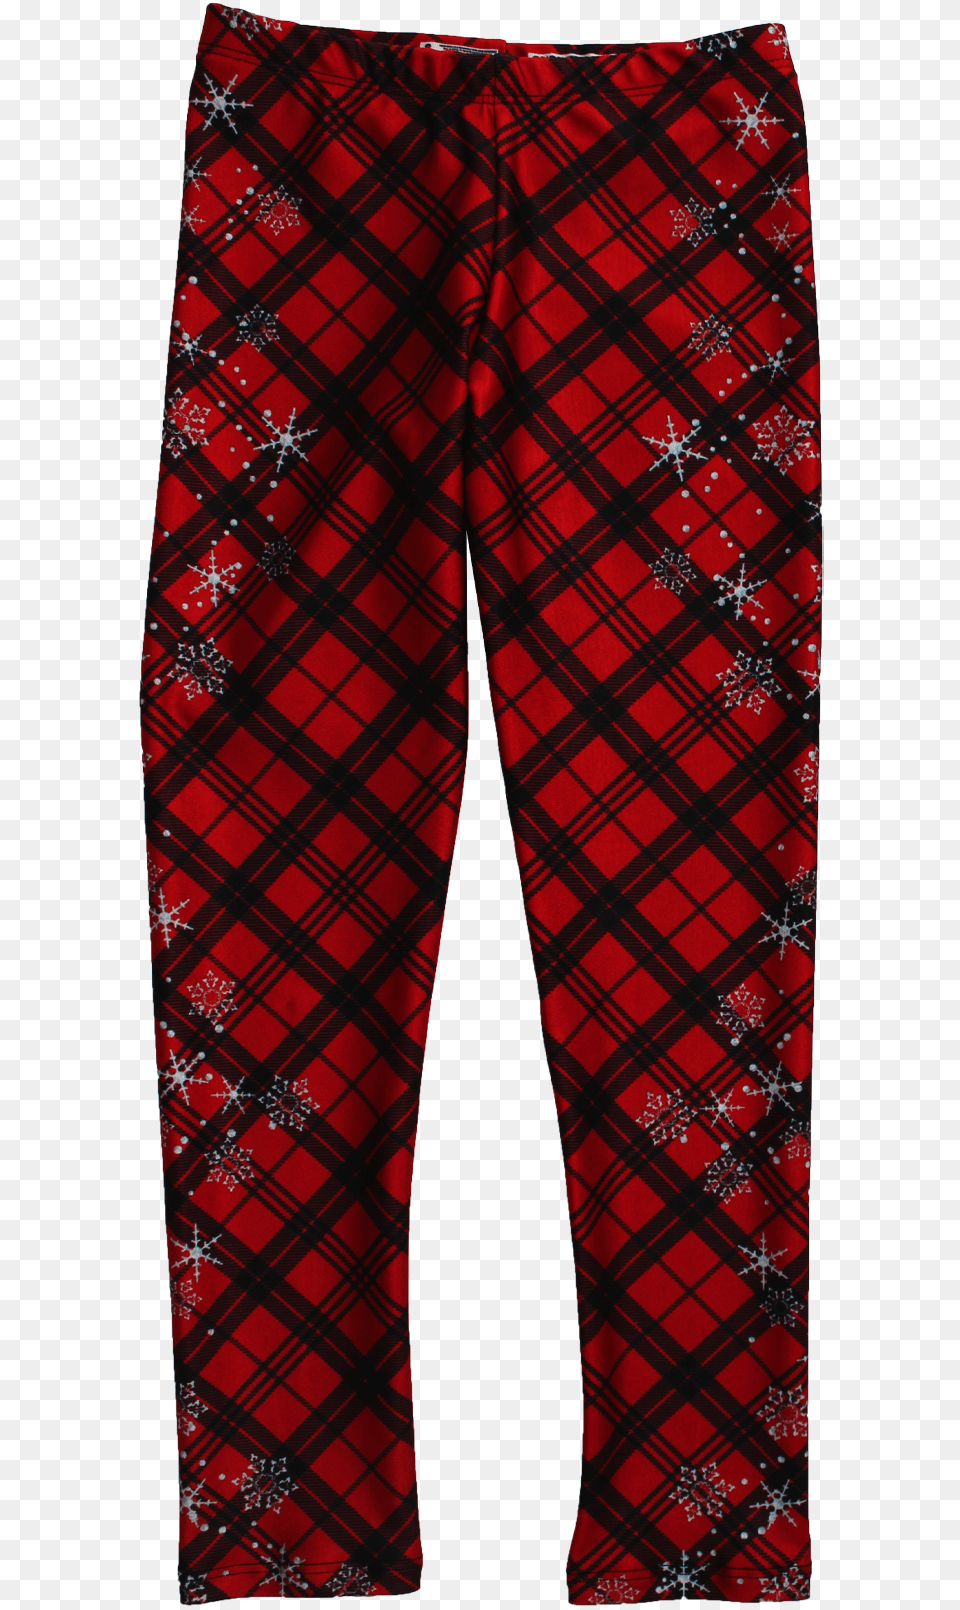 Pajamas, Clothing, Pants, Accessories, Formal Wear Png